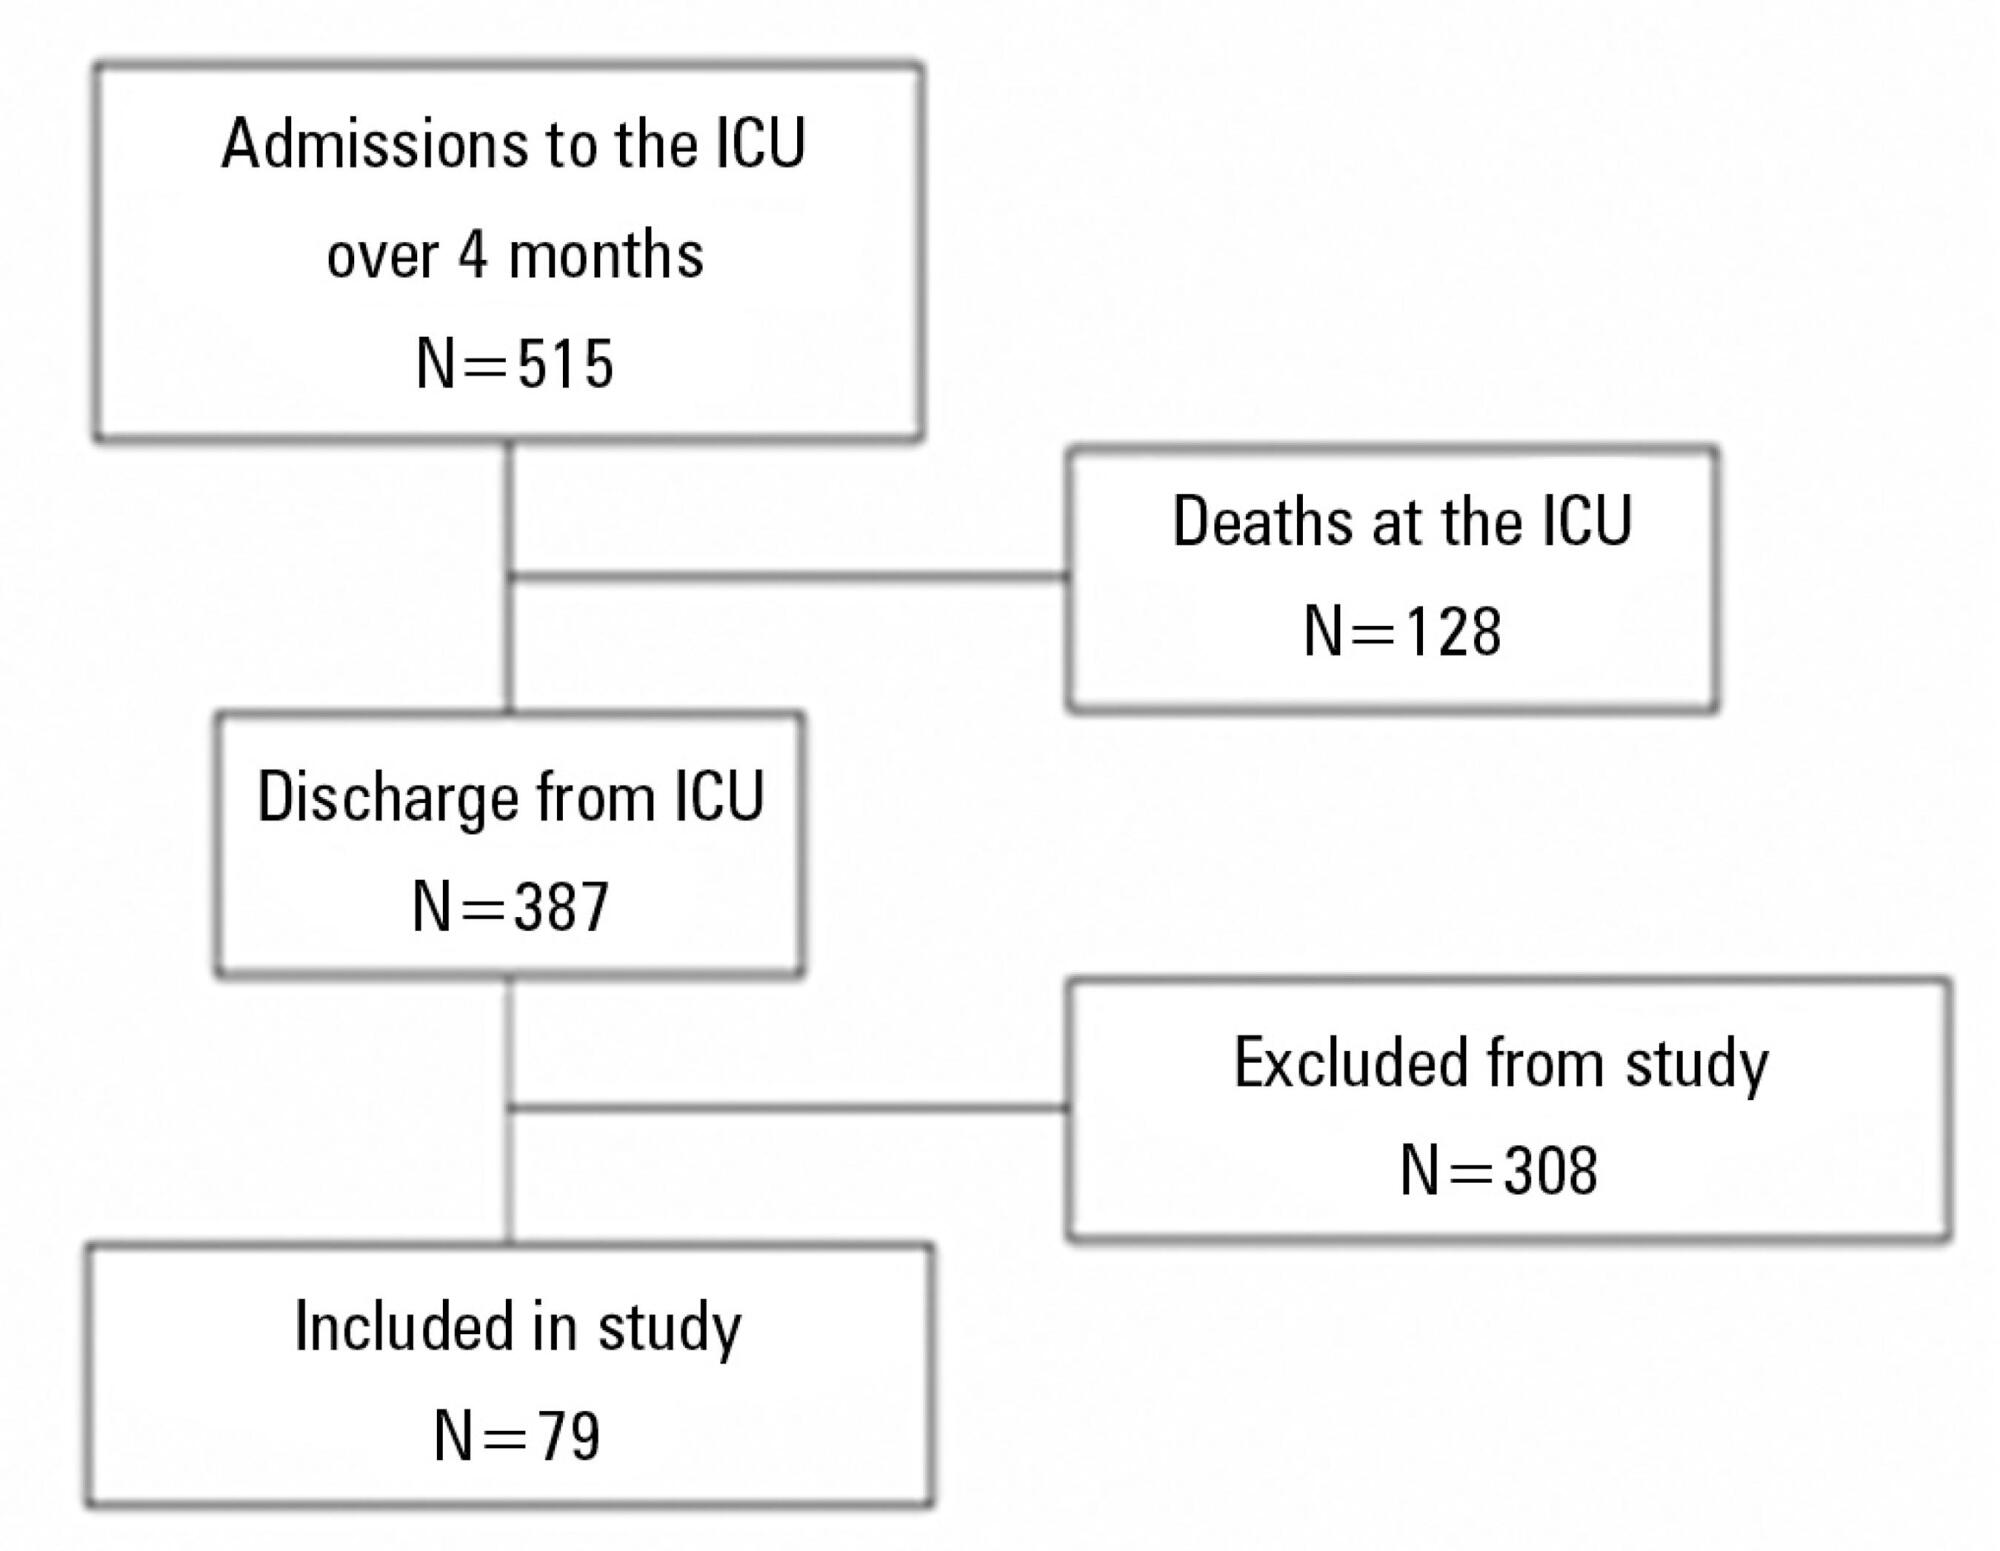 Functional and psychological features immediately after discharge from an Intensive Care Unit: prospective cohort study